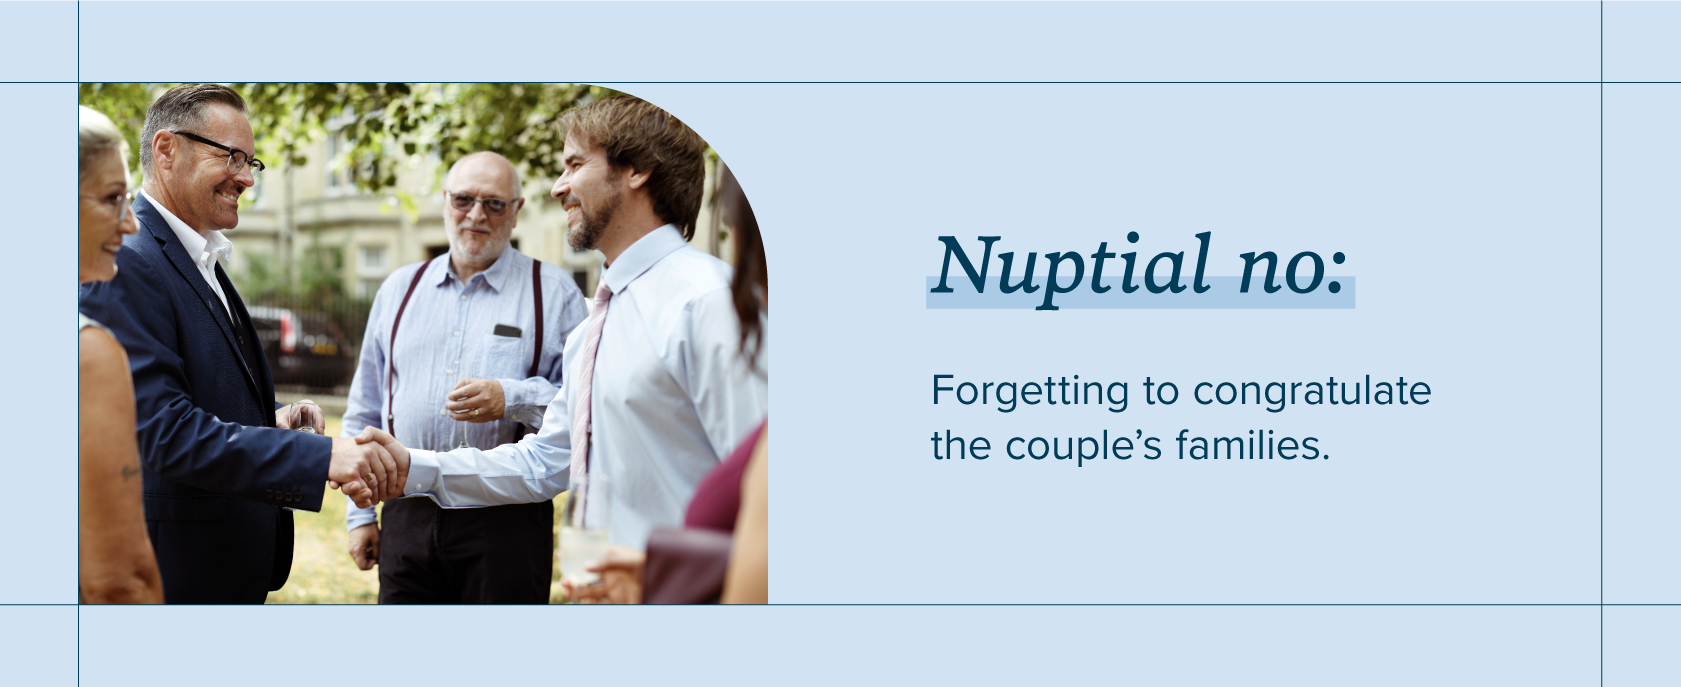 forgetting-to-congratulate-couples-families (2)